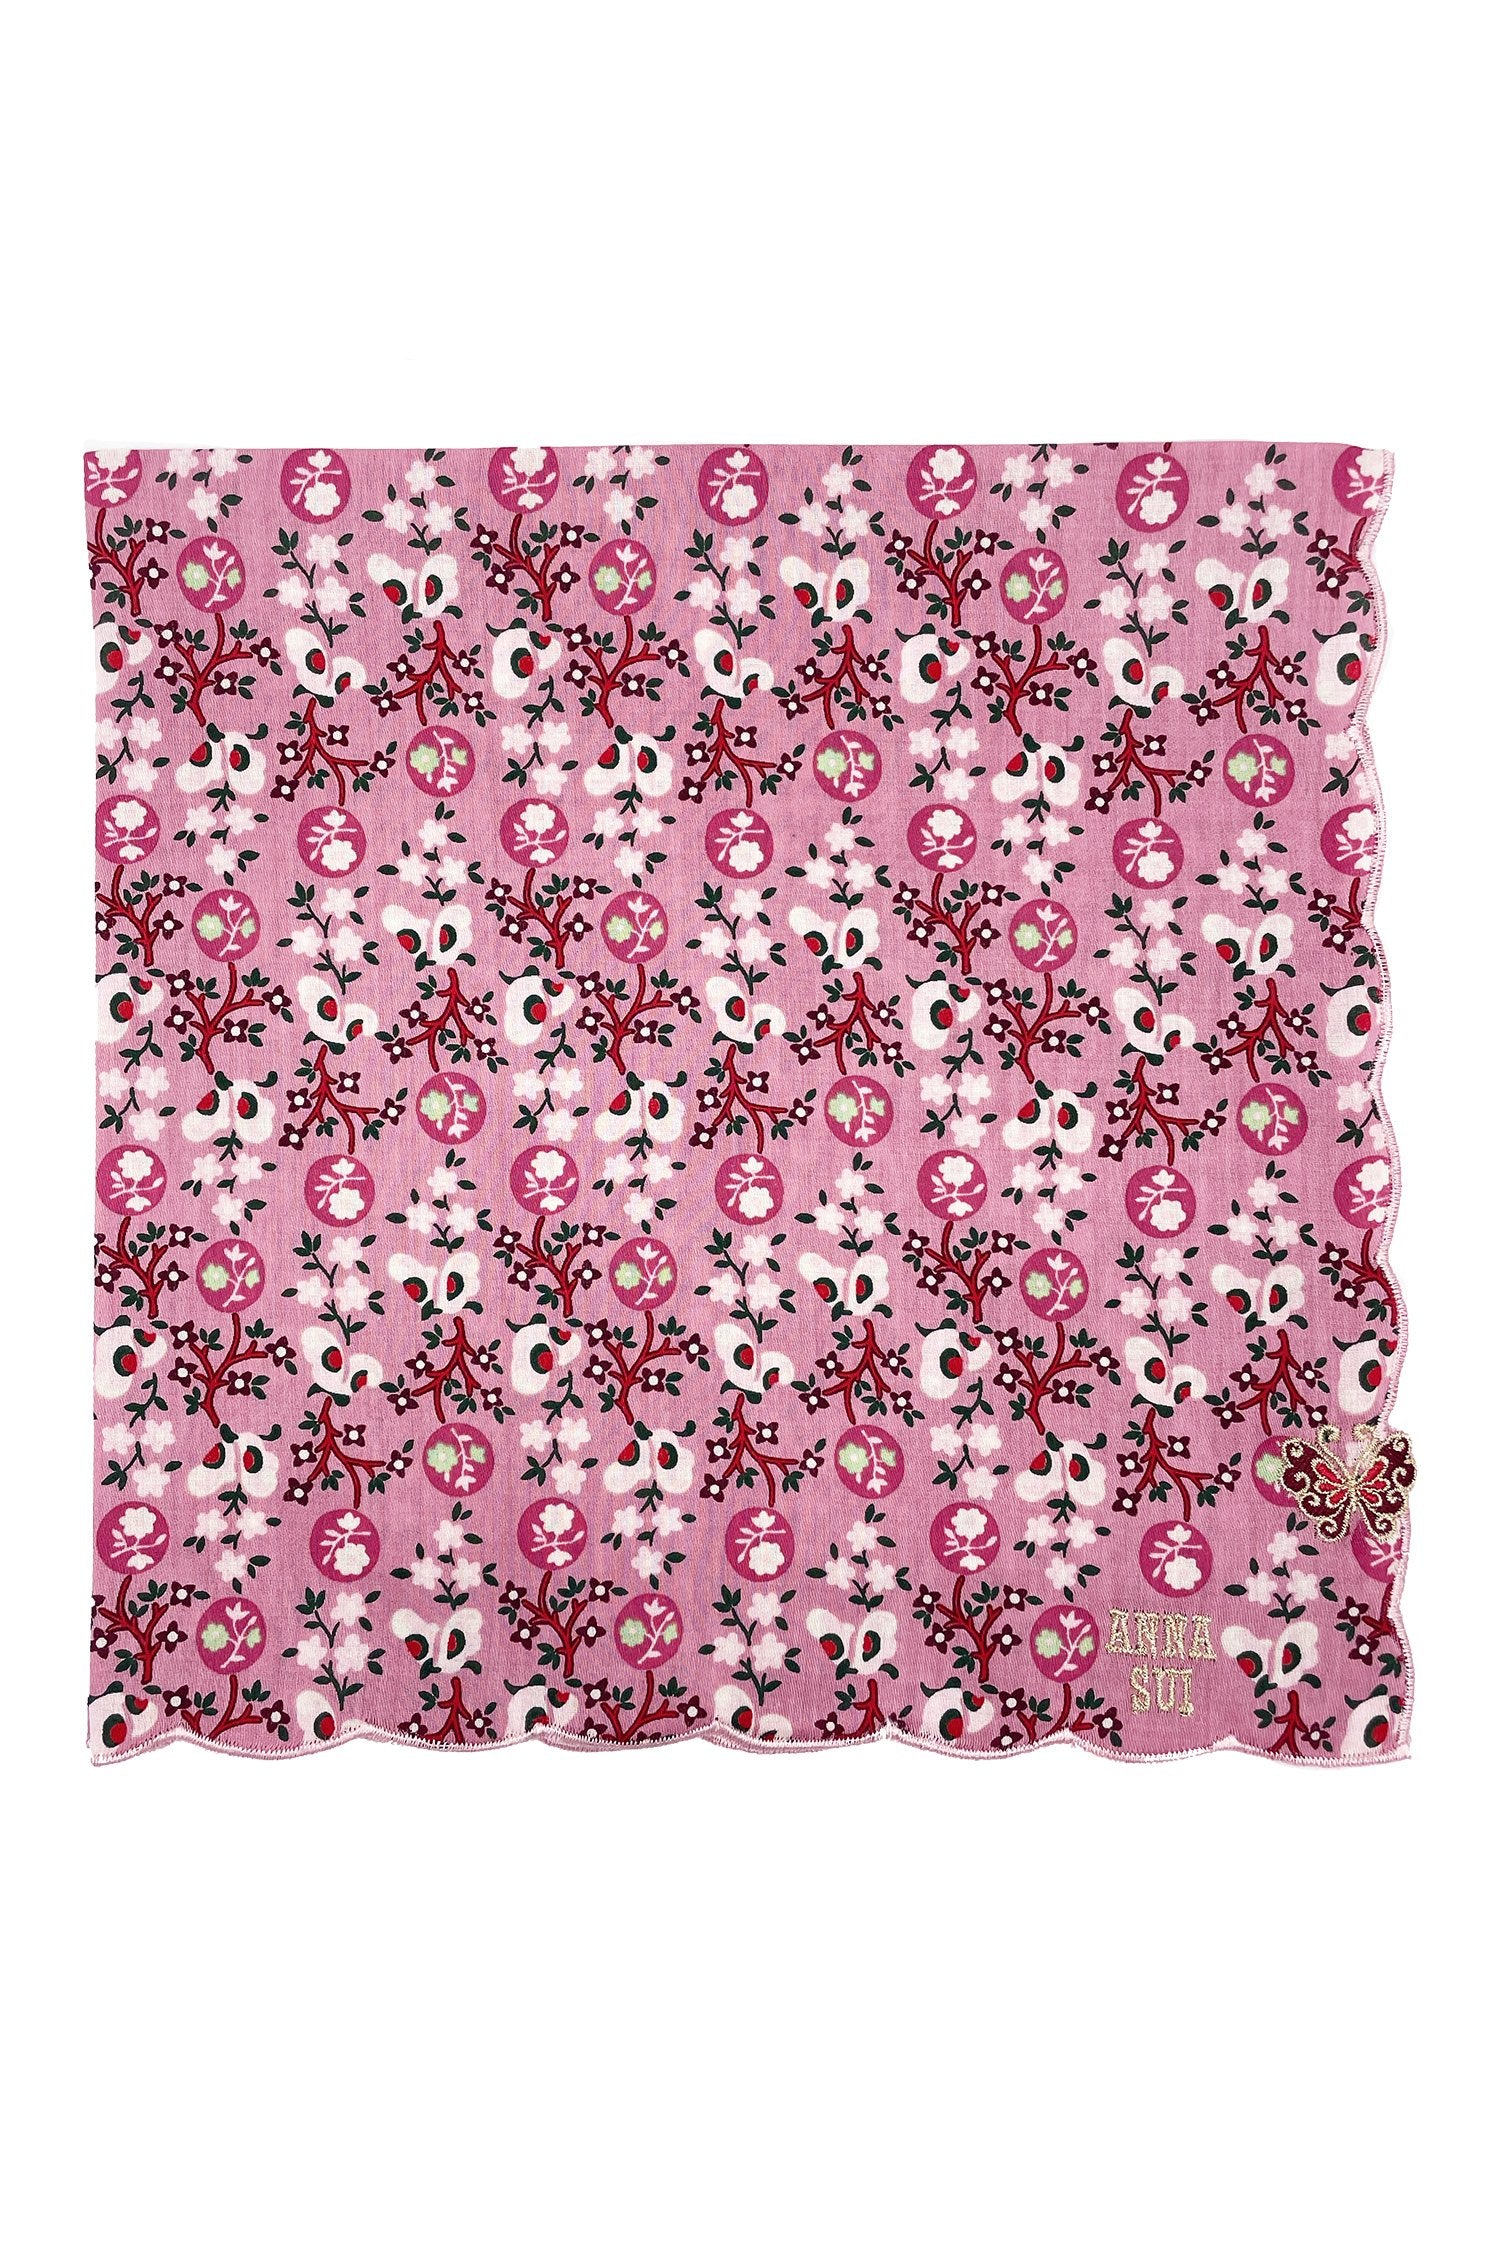 Handkerchief pink with repetitive pattern of white butterflies, and red/white floral, Anna’s label 